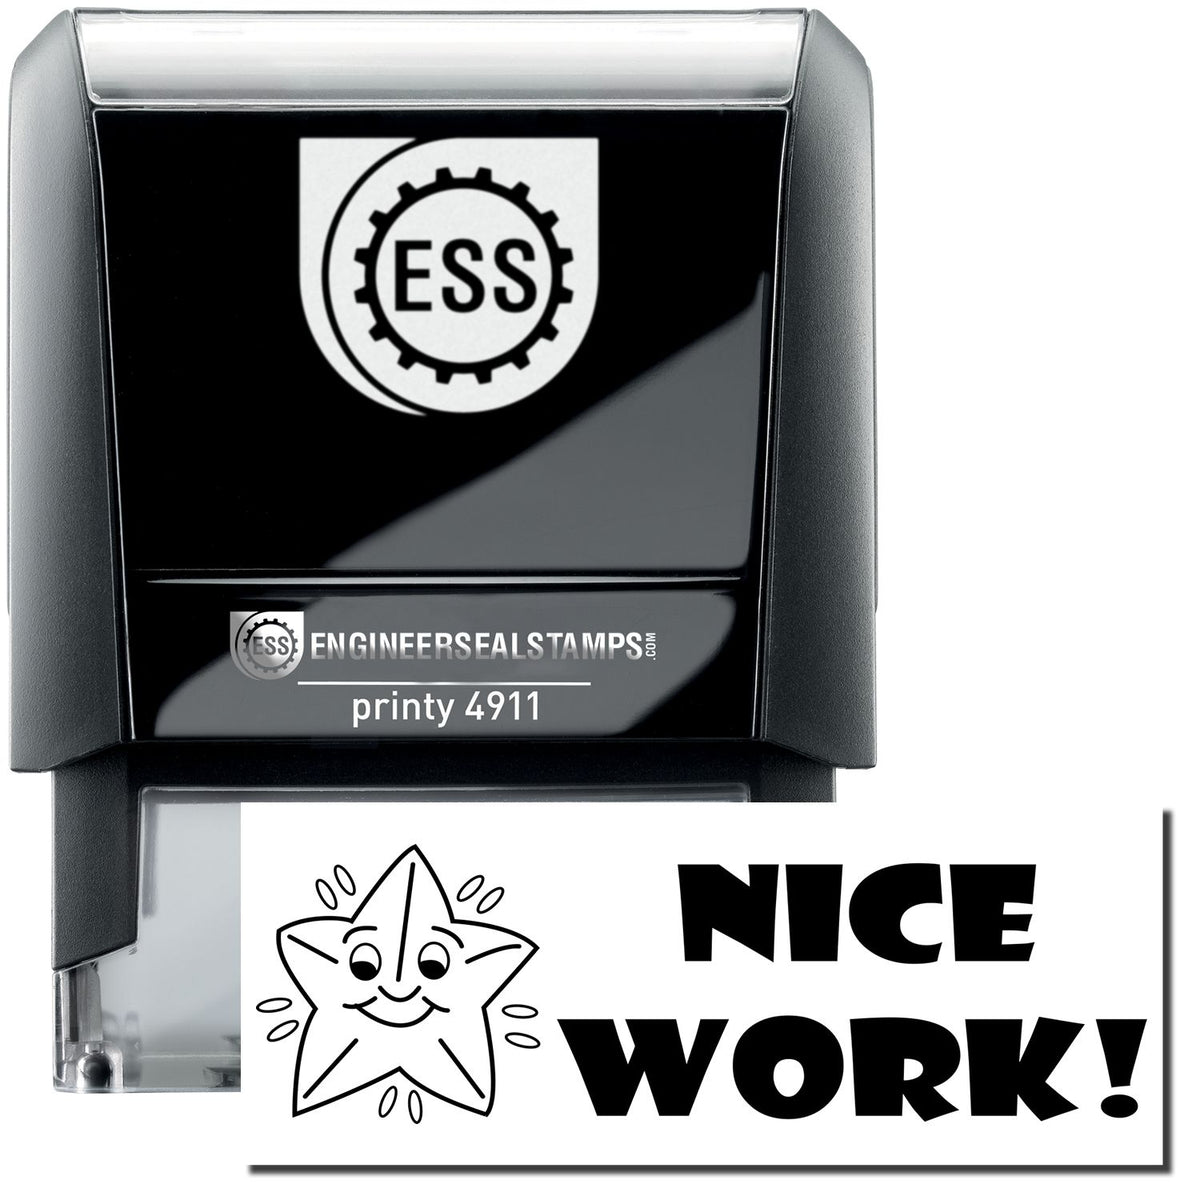 A self-inking stamp with a stamped image showing how the text &quot;Nice Work!&quot; in a bold font with an image of a starfish with a smile on the left side is displayed after stamping.